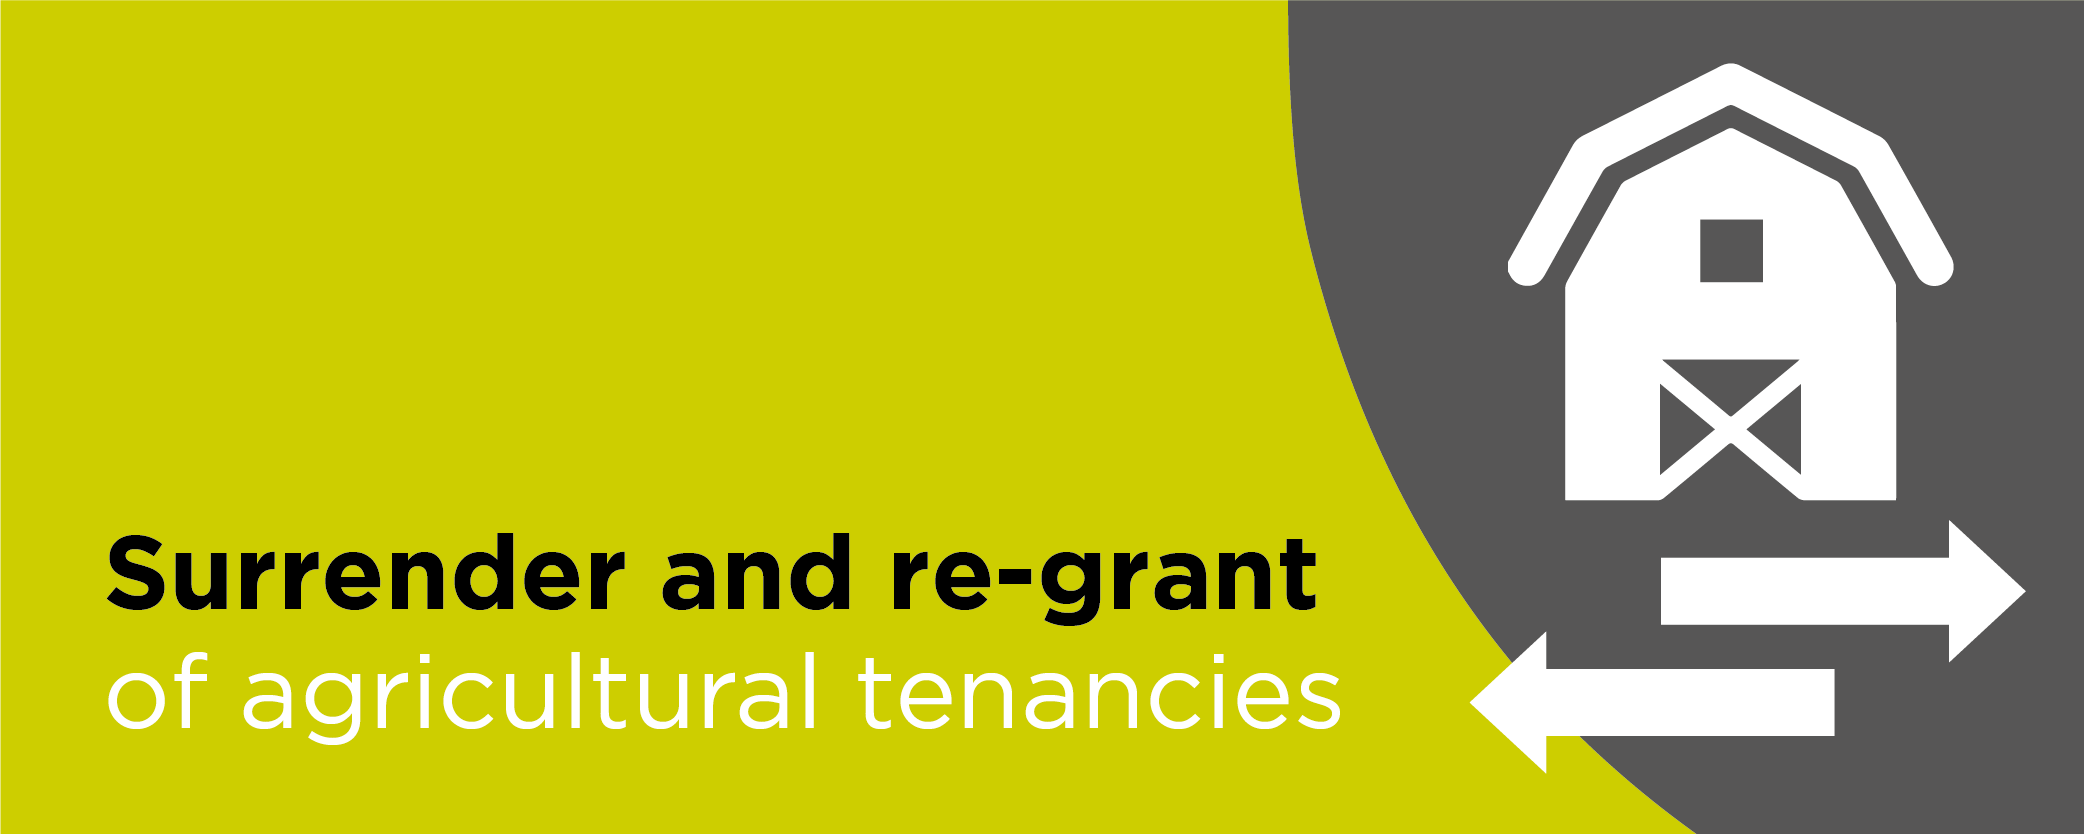 Surrender and re-grant of agricultural tenancies